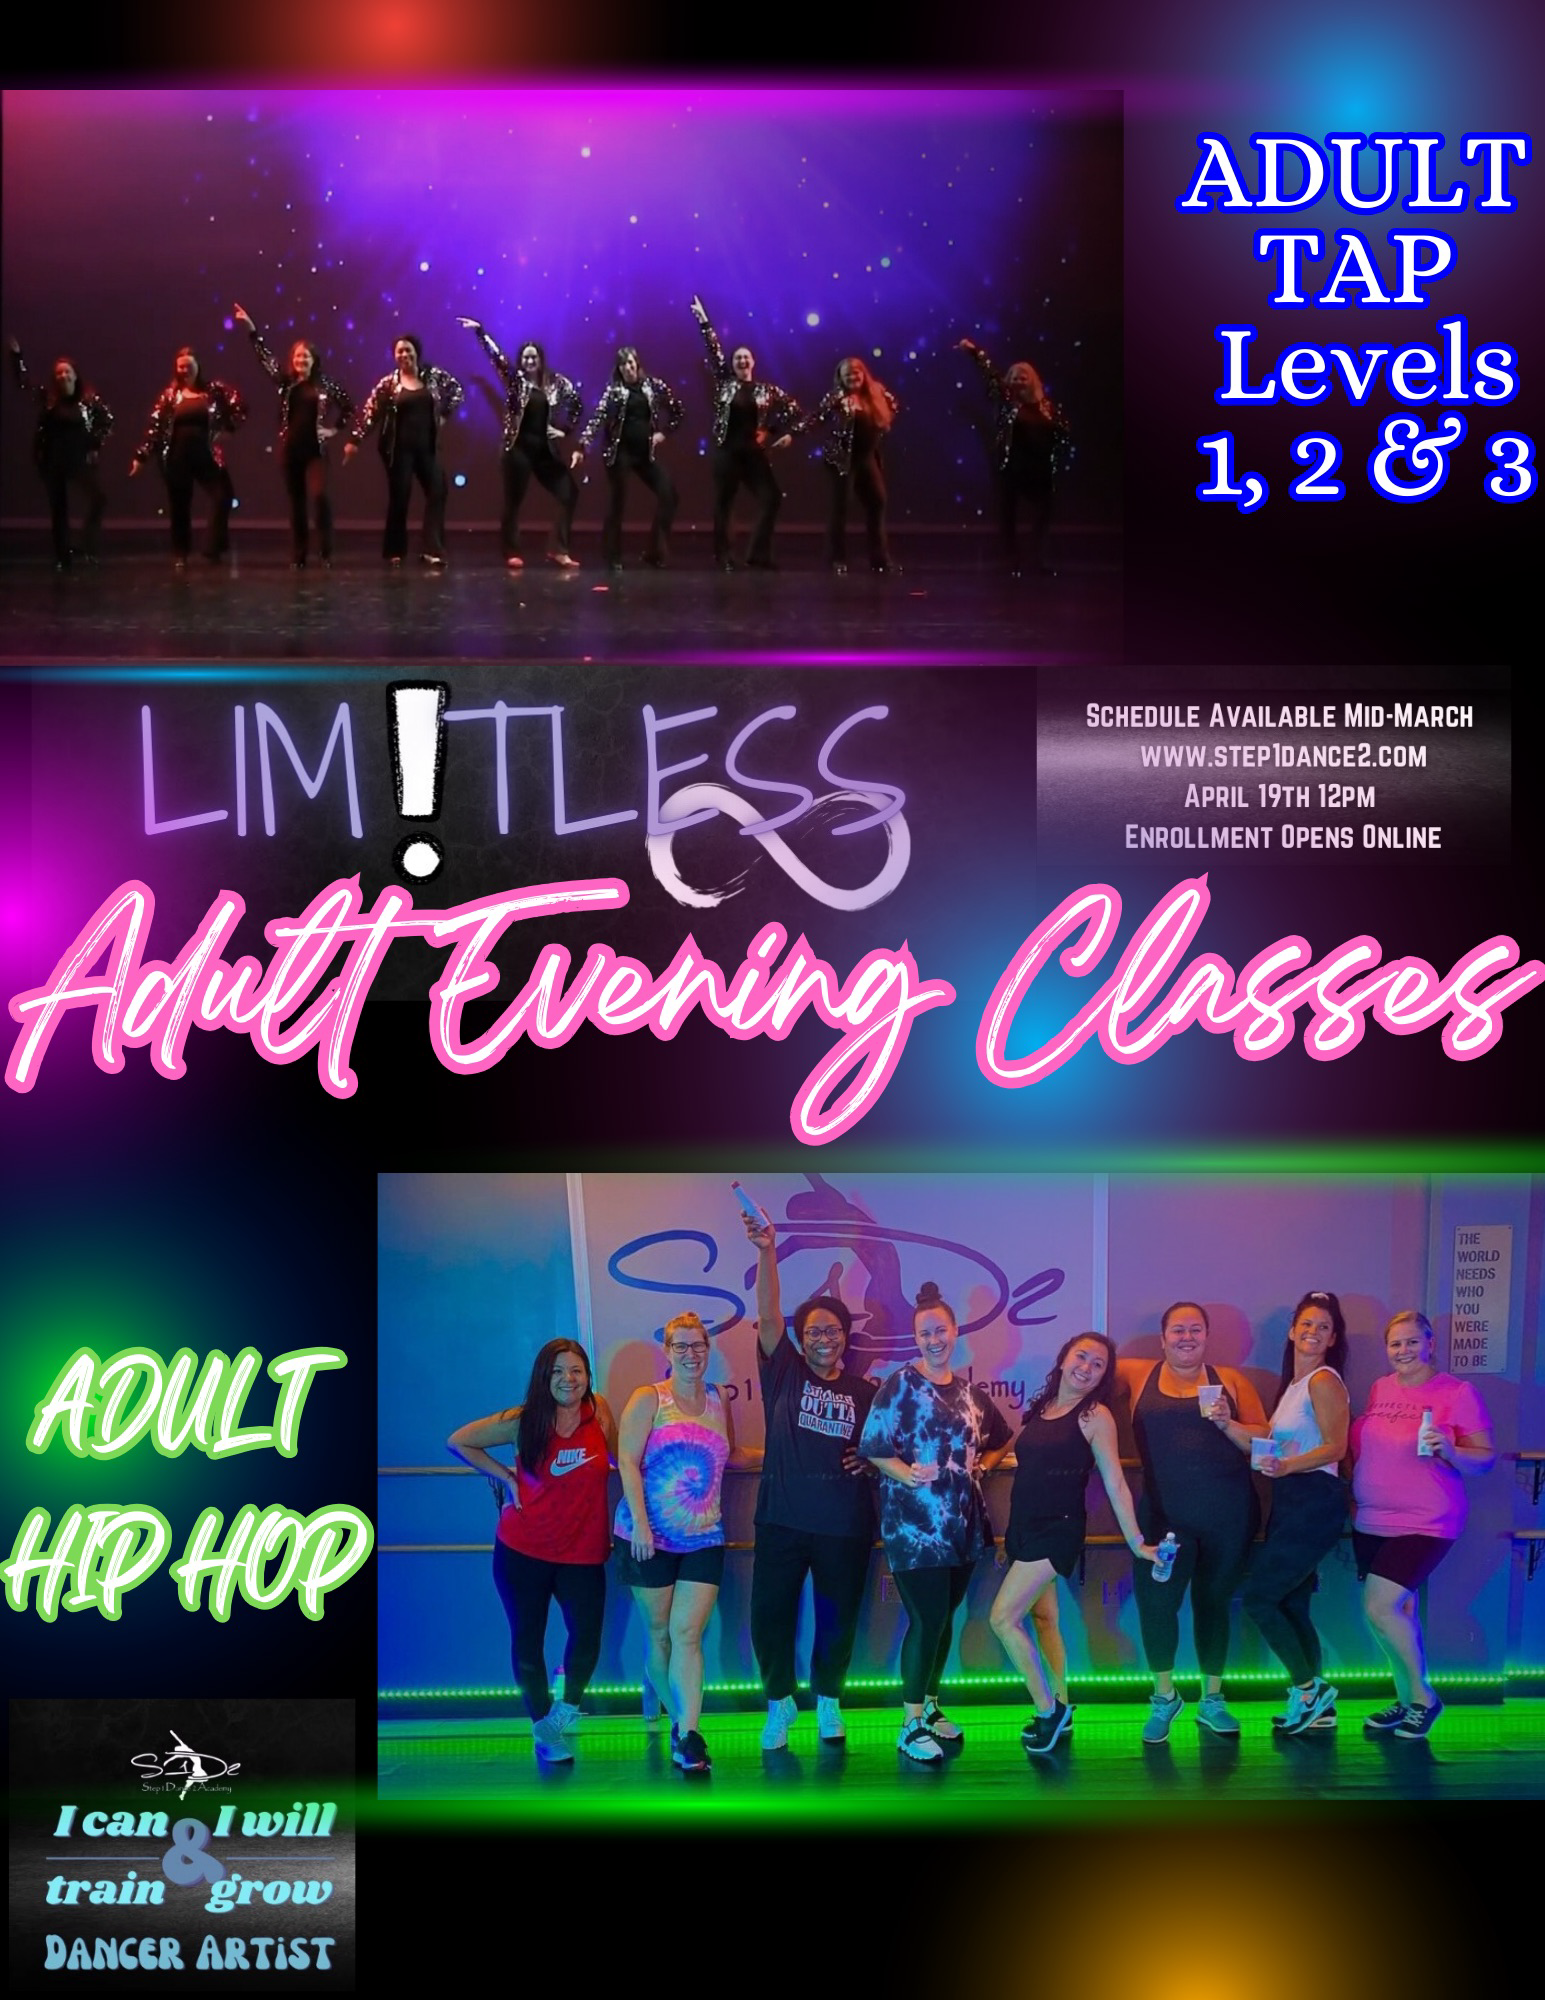 Limitless Adult Evening Classes